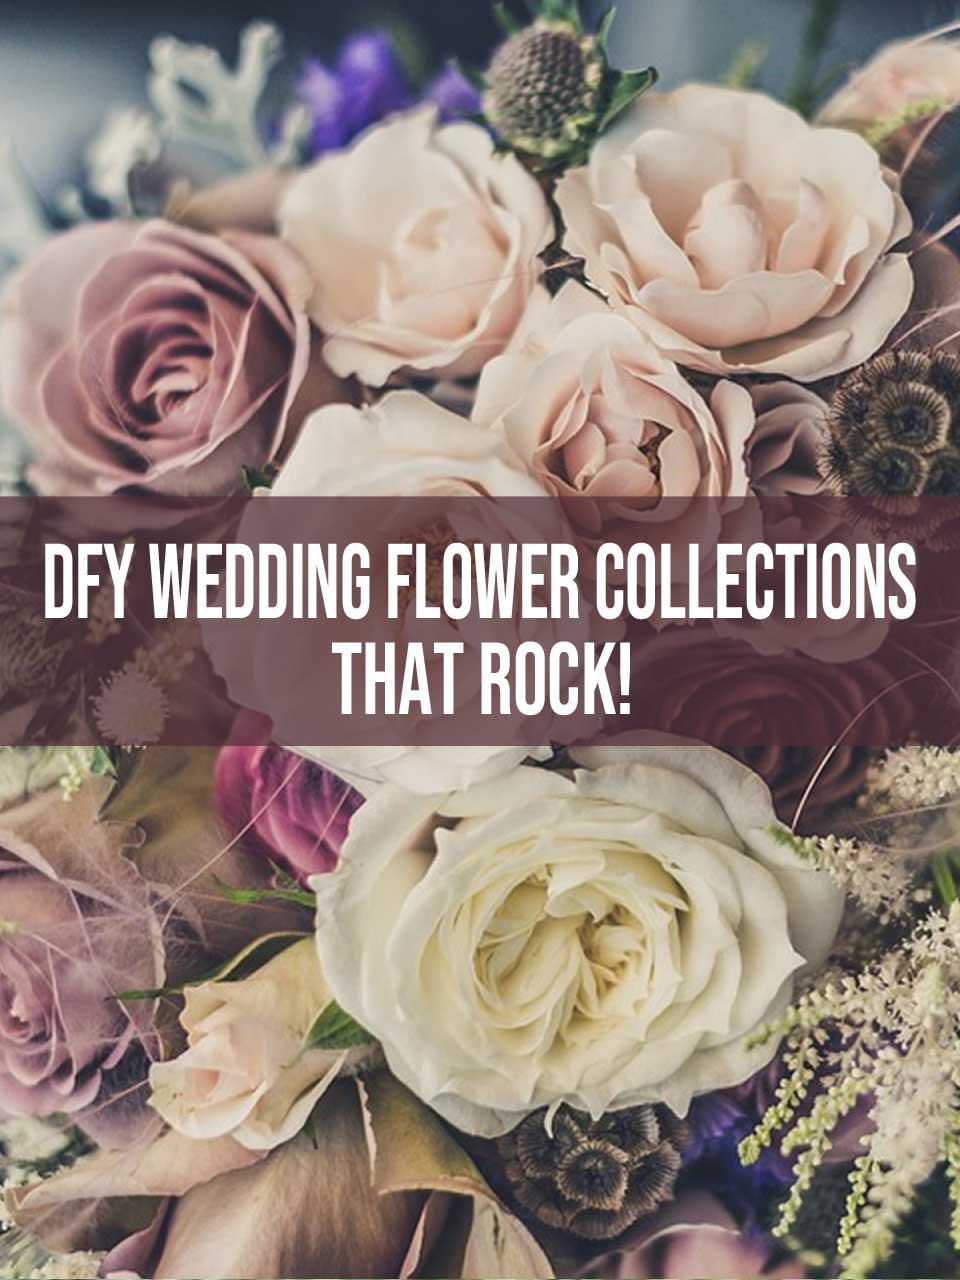 DFY Wedding Collections